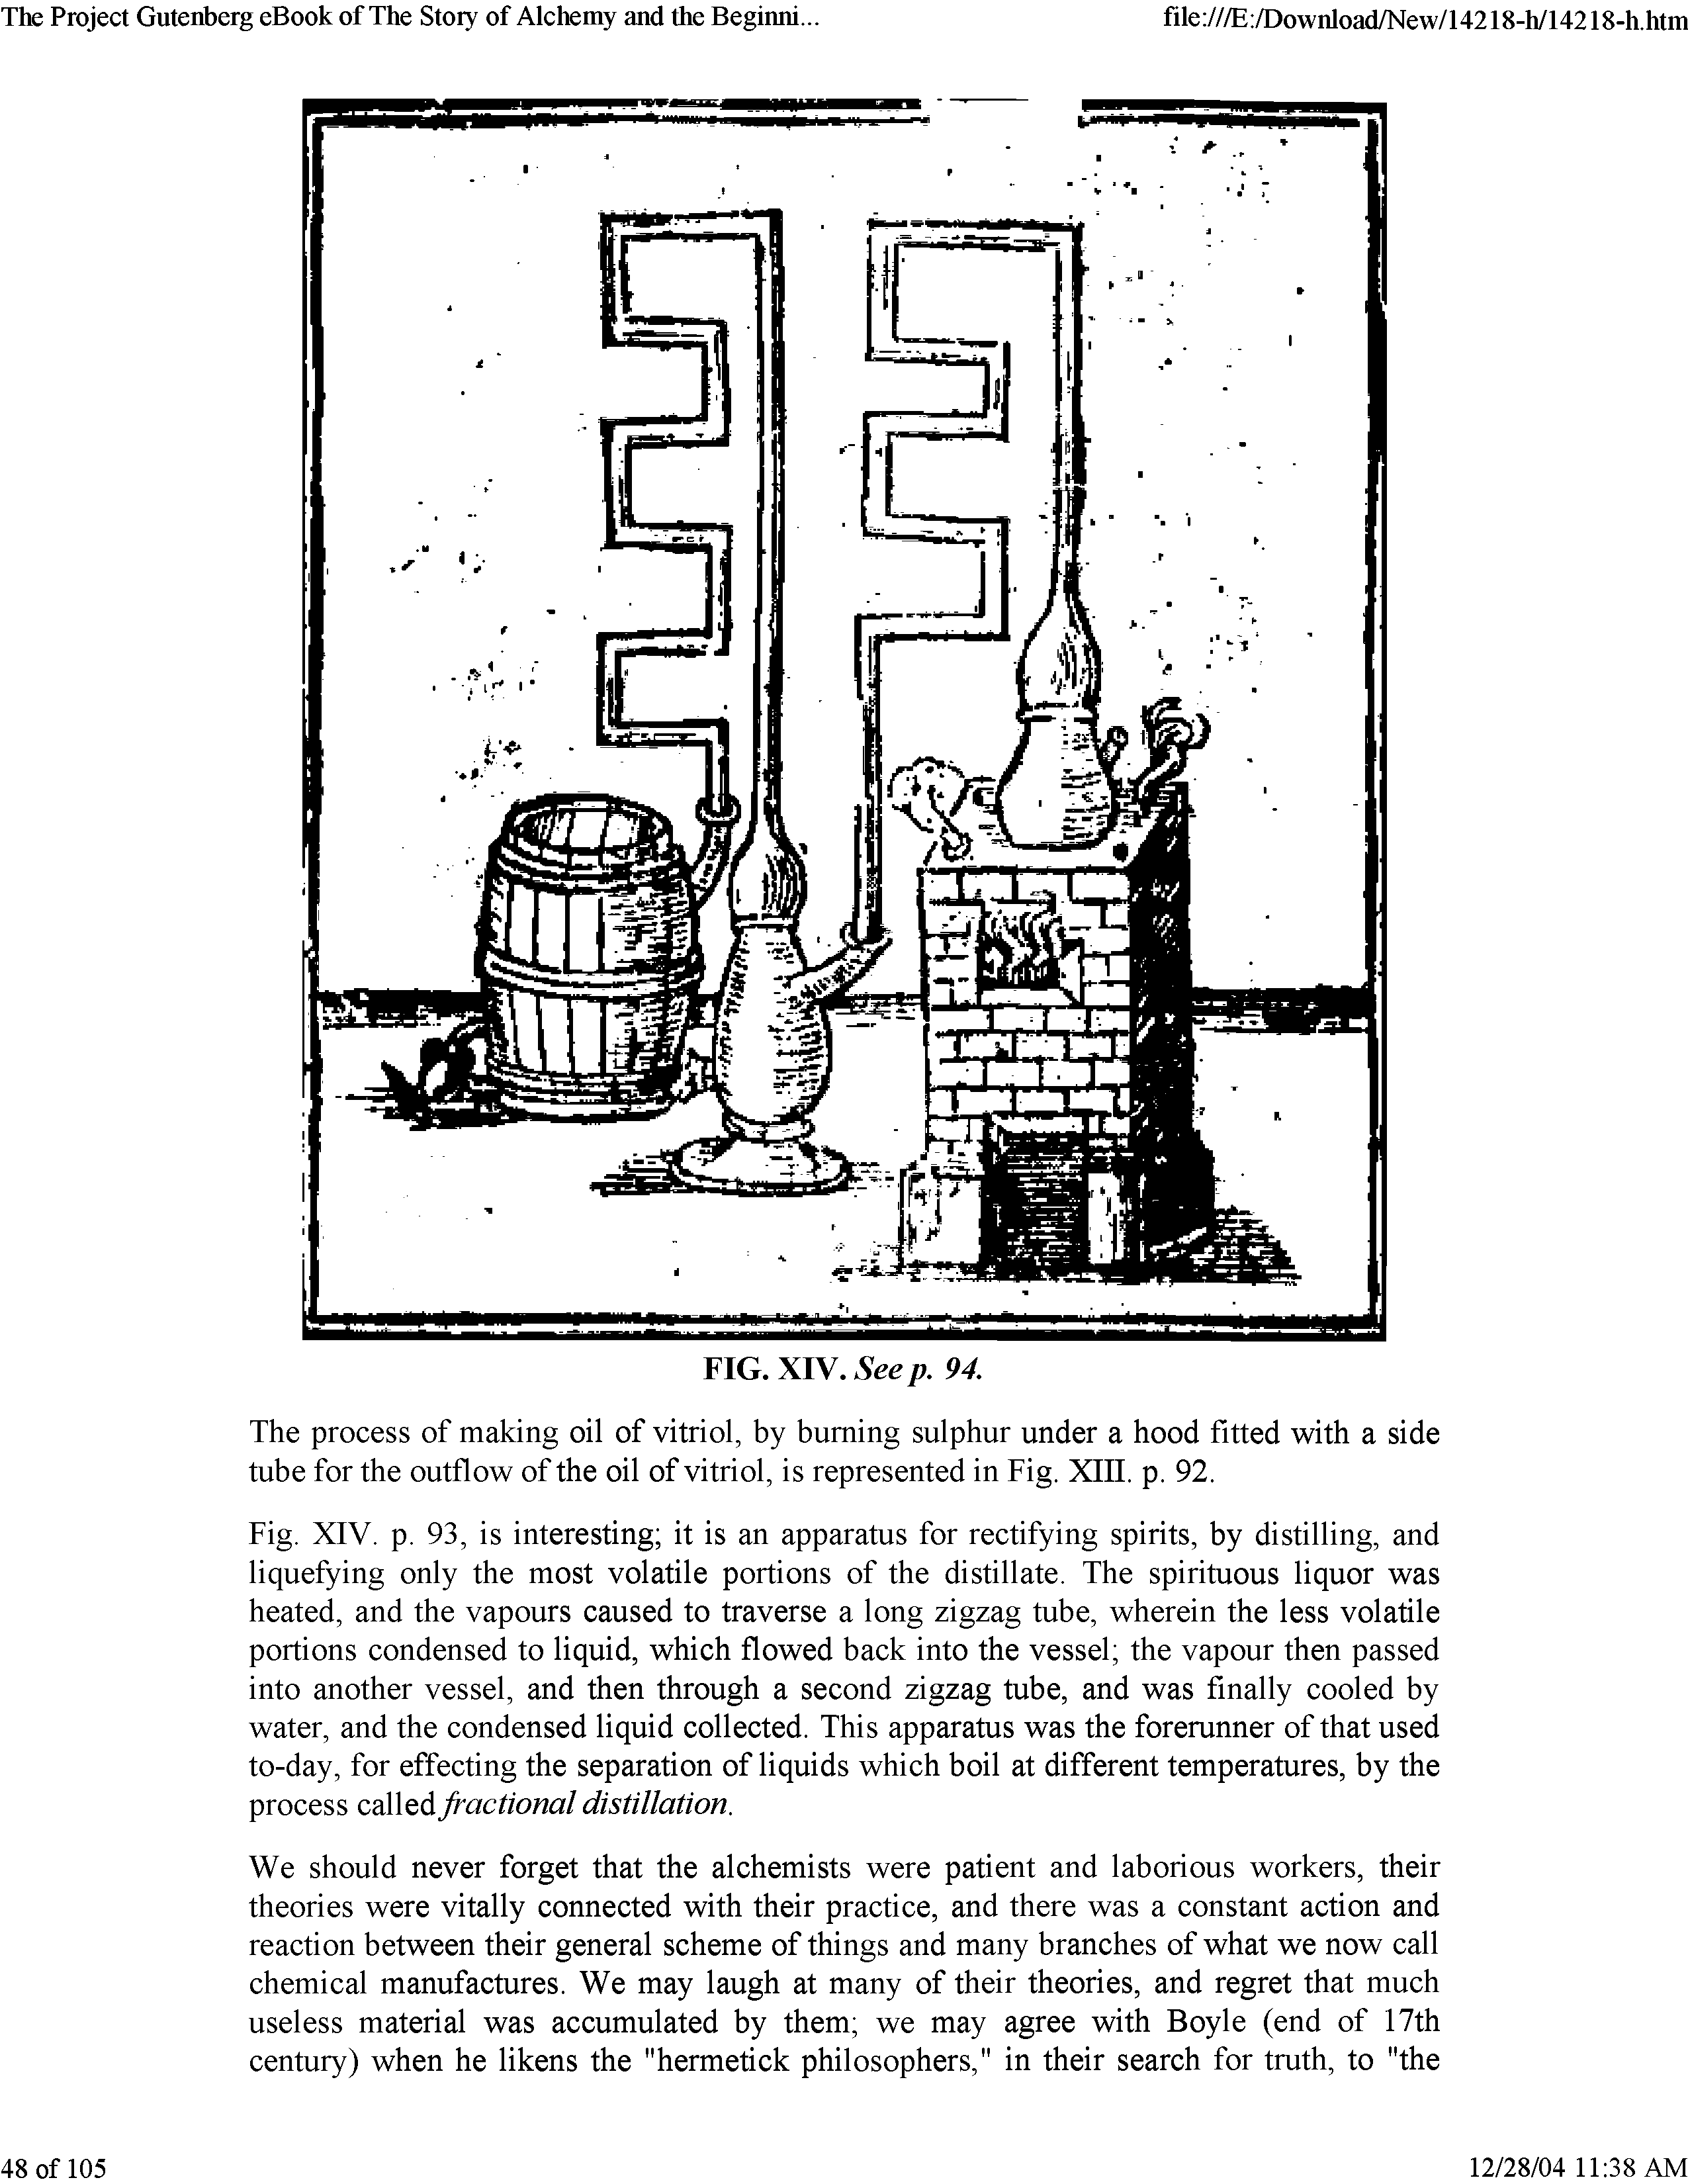 Fig. XIV. p. 93, is interesting it is an apparatus for rectifying spirits, by distilling, and liquefying only the most volatile portions of the distillate. The spirituous liquor was heated, and the vapours caused to traverse a long zigzag tube, wherein the less volatile portions condensed to liquid, which flowed back into the vessel the vapour then passed into another vessel, and then through a second zigzag tube, and was finally cooled by water, and the condensed liquid collected. This apparatus was the forerunner of that used to-day, for effecting the separation of liquids which boil at different temperatures, by the process called fractional distillation.